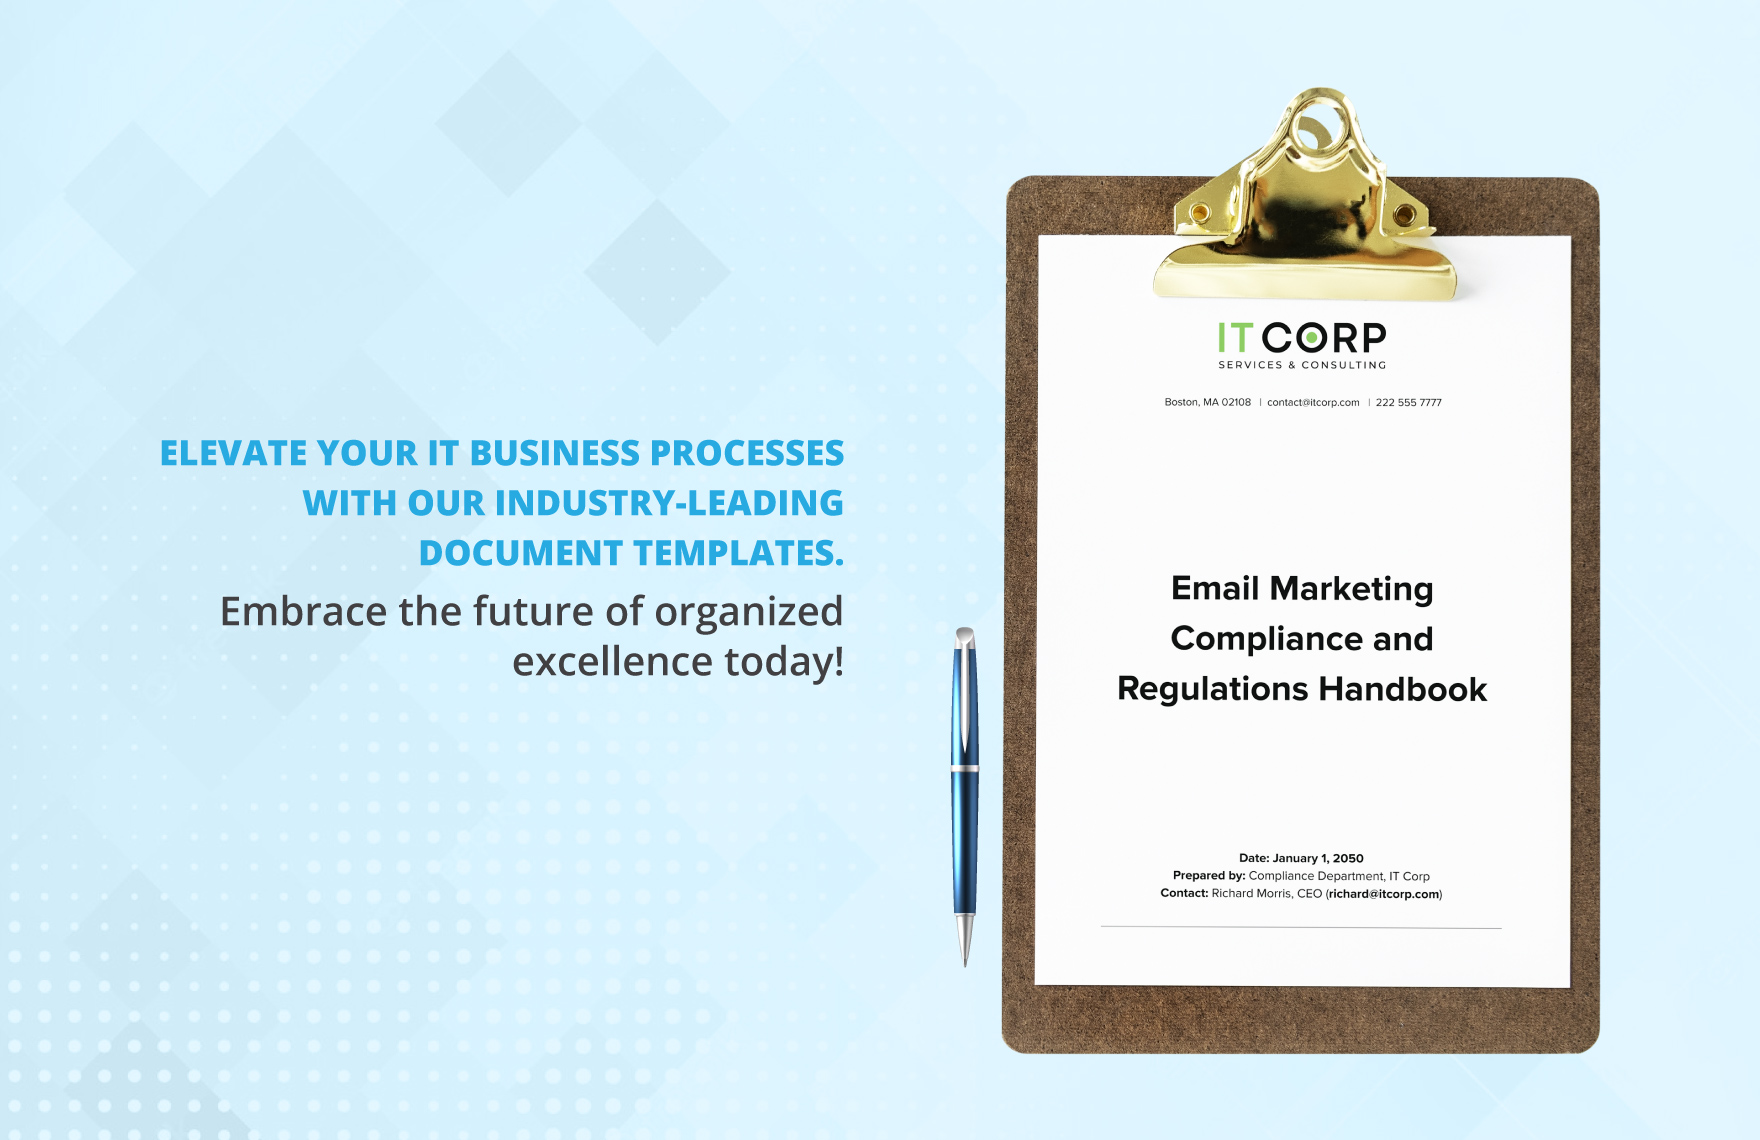 Email Marketing Compliance and Regulations Handbook Template